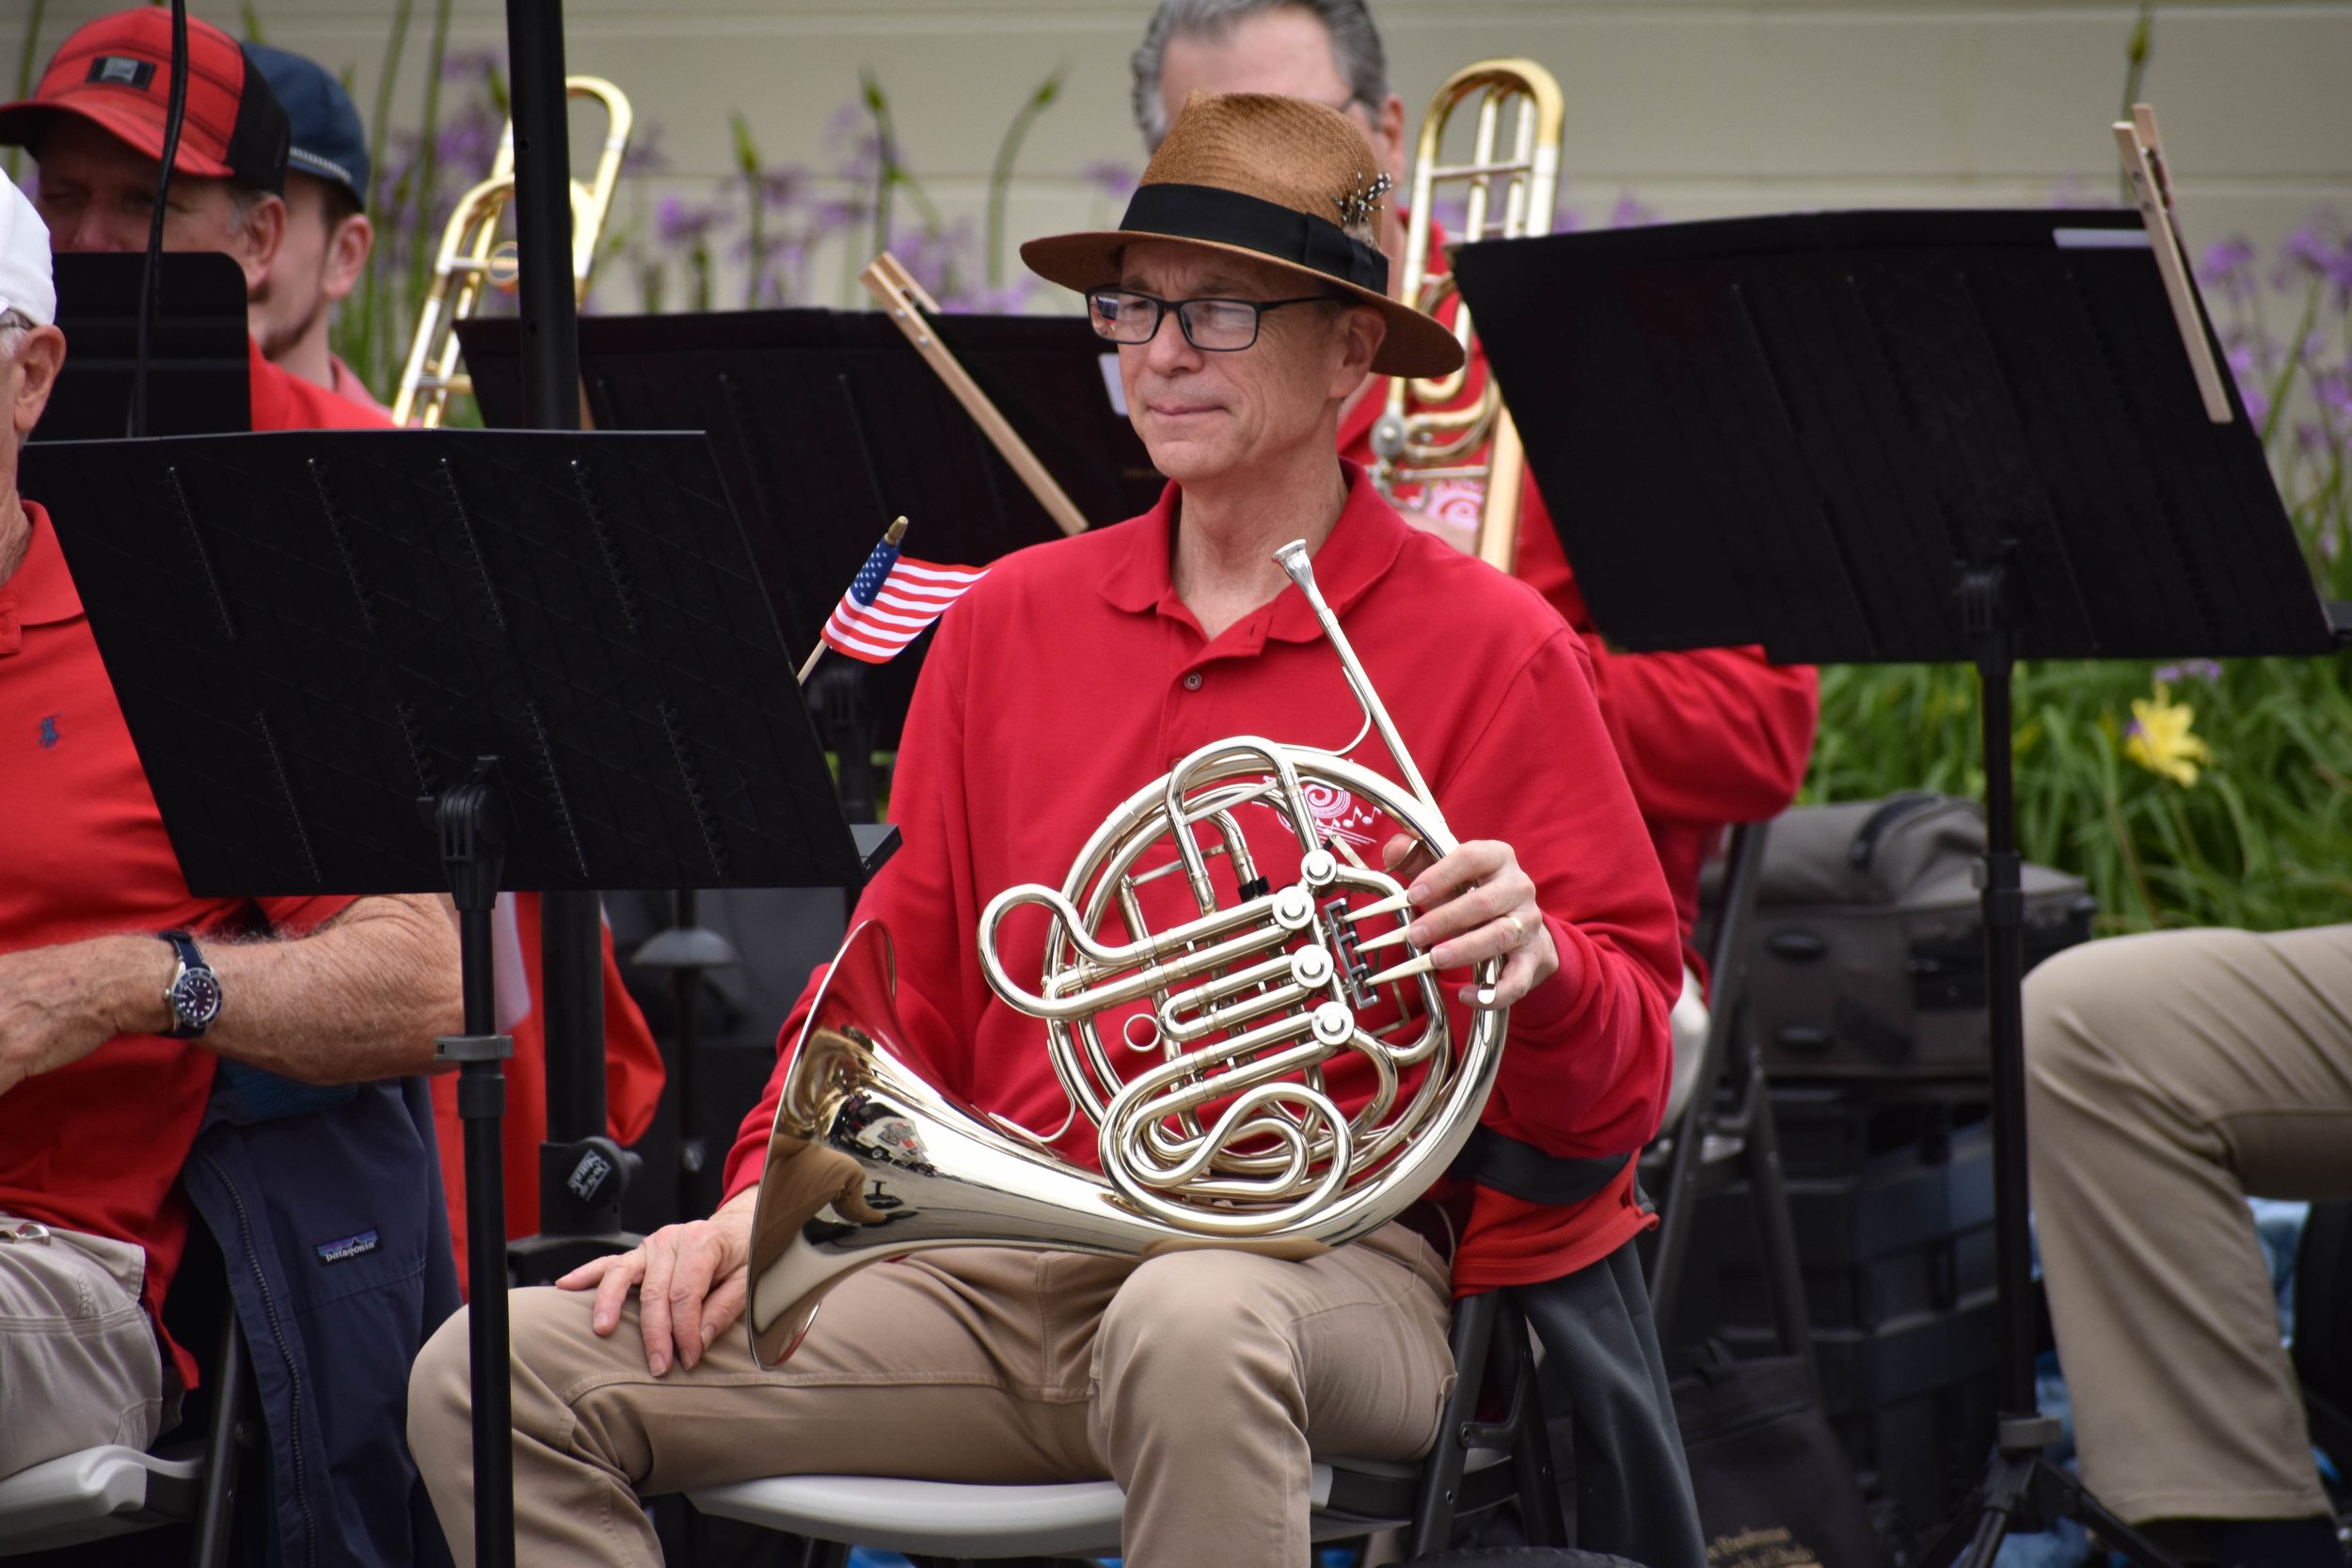 05-29-2023 LCCB and Jazz Band Memorial Day Concerts by Peyton Webster176-136.jpg